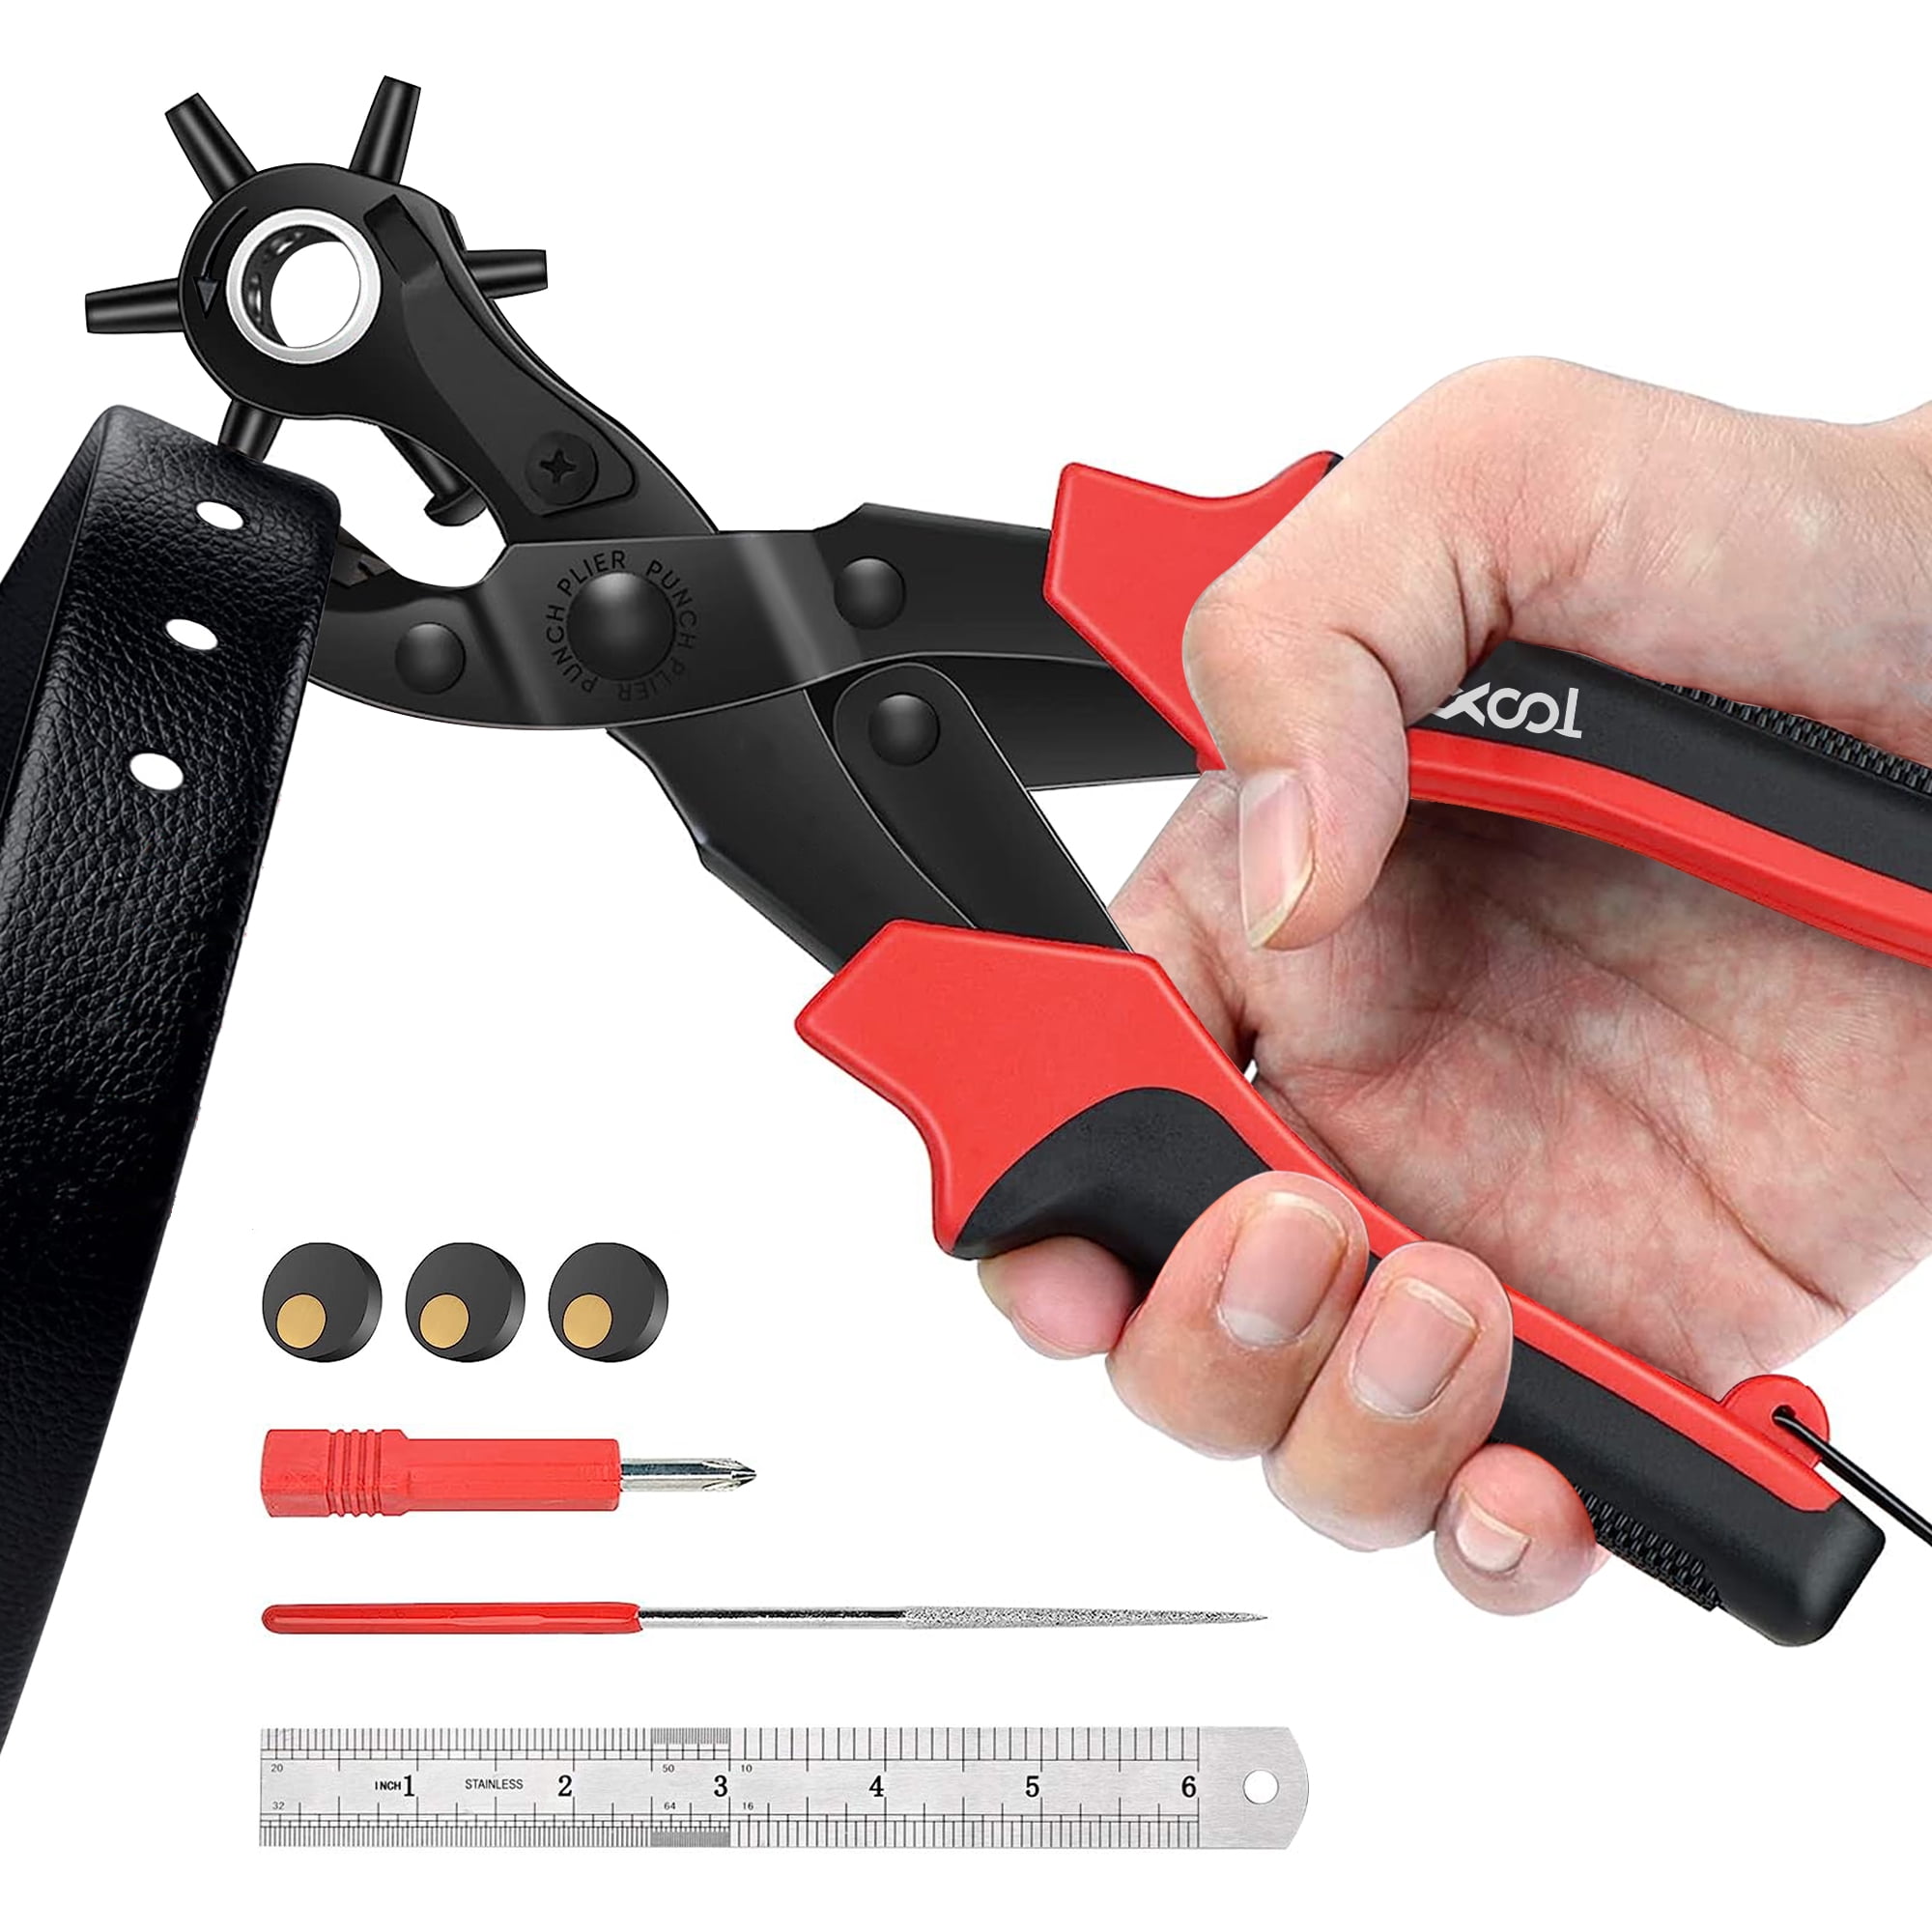 Mduoduo Sharp Hollow Hole Punch Tool Heavy Duty Iron Leather Fabric Gasket  0.5mm - 10mm